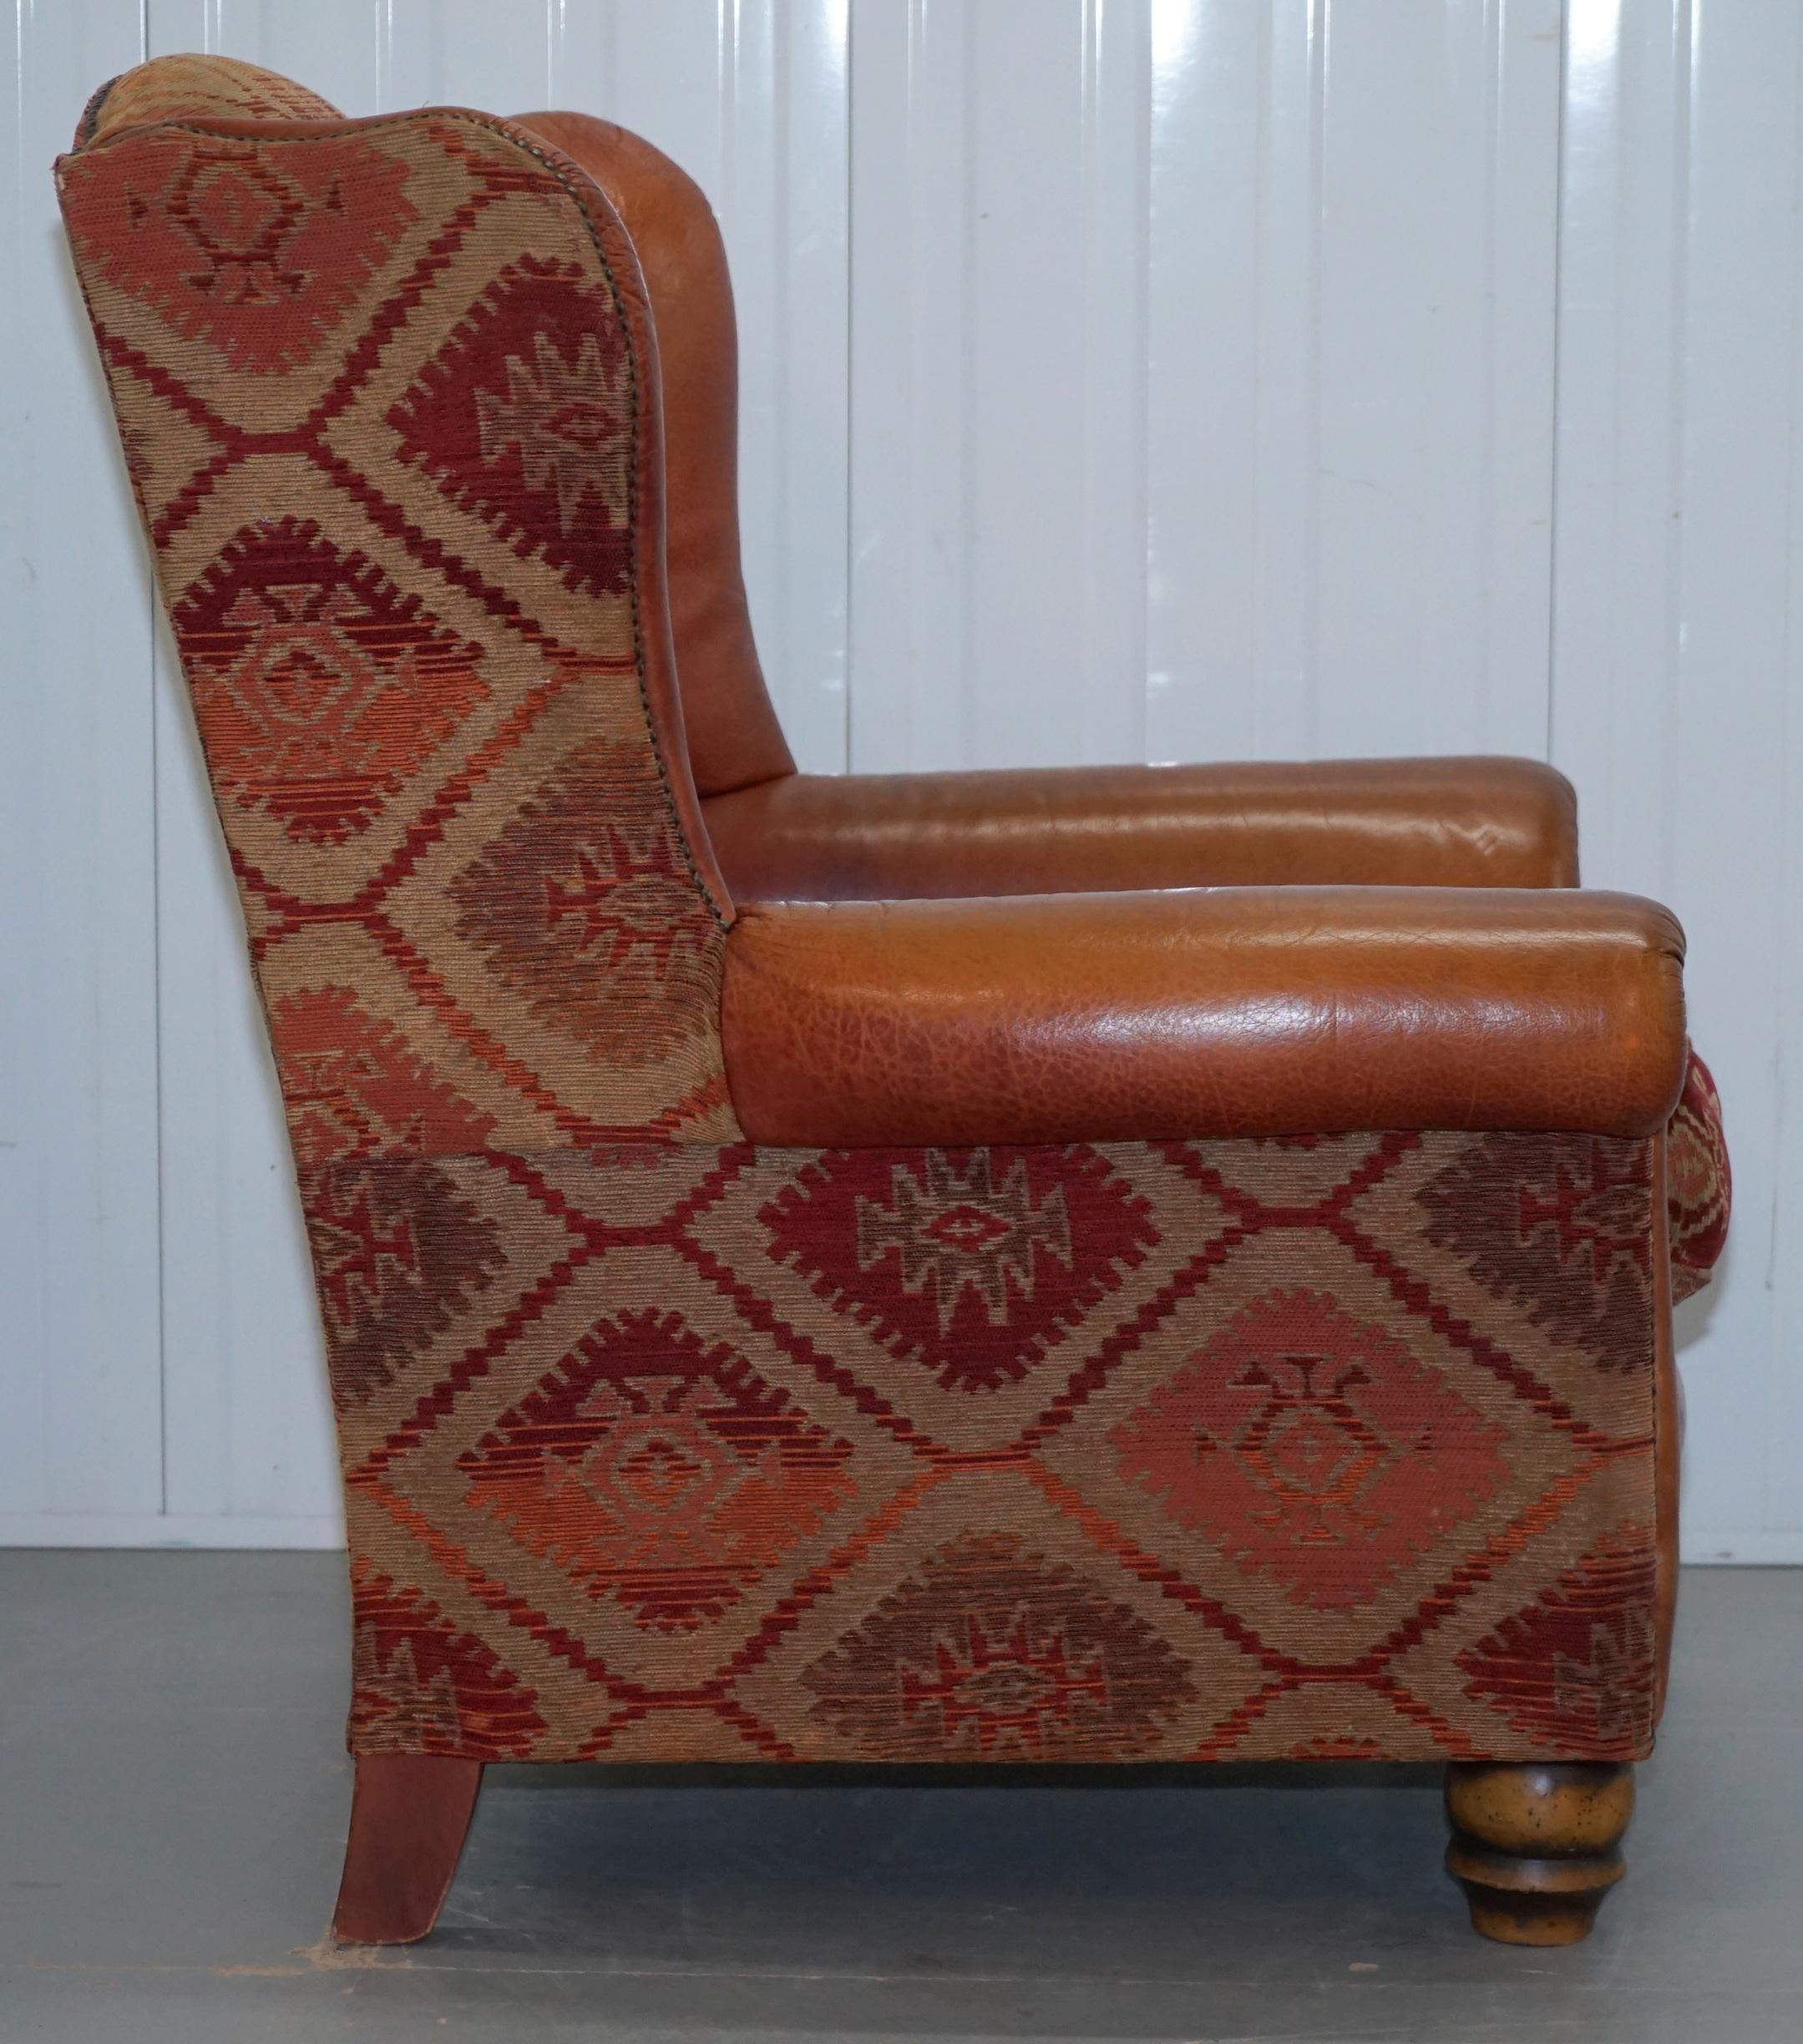 Tetrad Eastwood Brown Leather and Kilim Upholstery Armchair Lovely 4